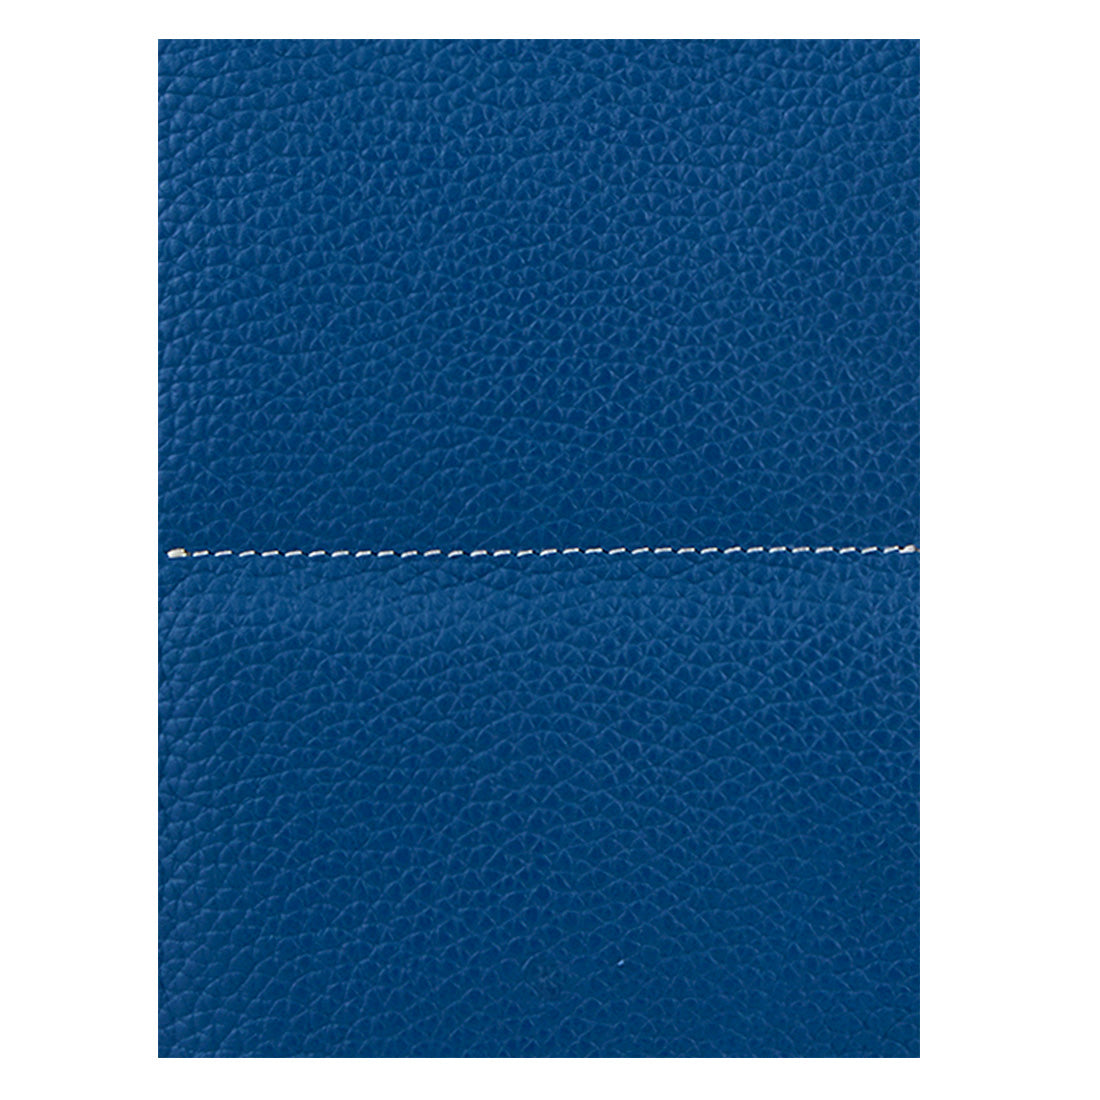 Genuine Grainy Leather Navy Blue Compact Multi-purpose For Unisex